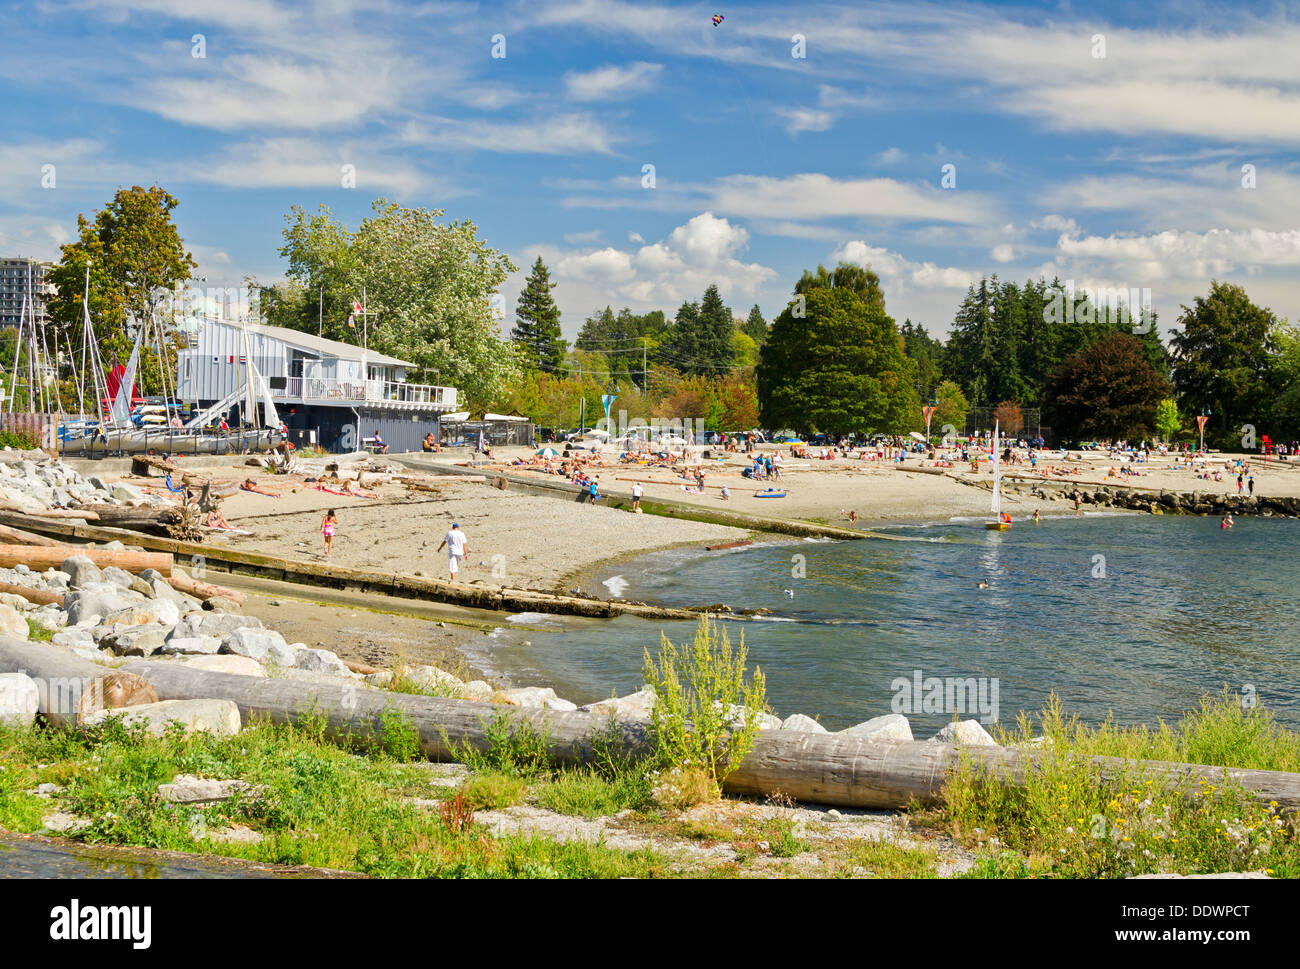 Sunbathers enjoying the sandy beach at Ambleside Park in West Vancouver, British Columbia, Canada. Beautiful summer day. Stock Photo